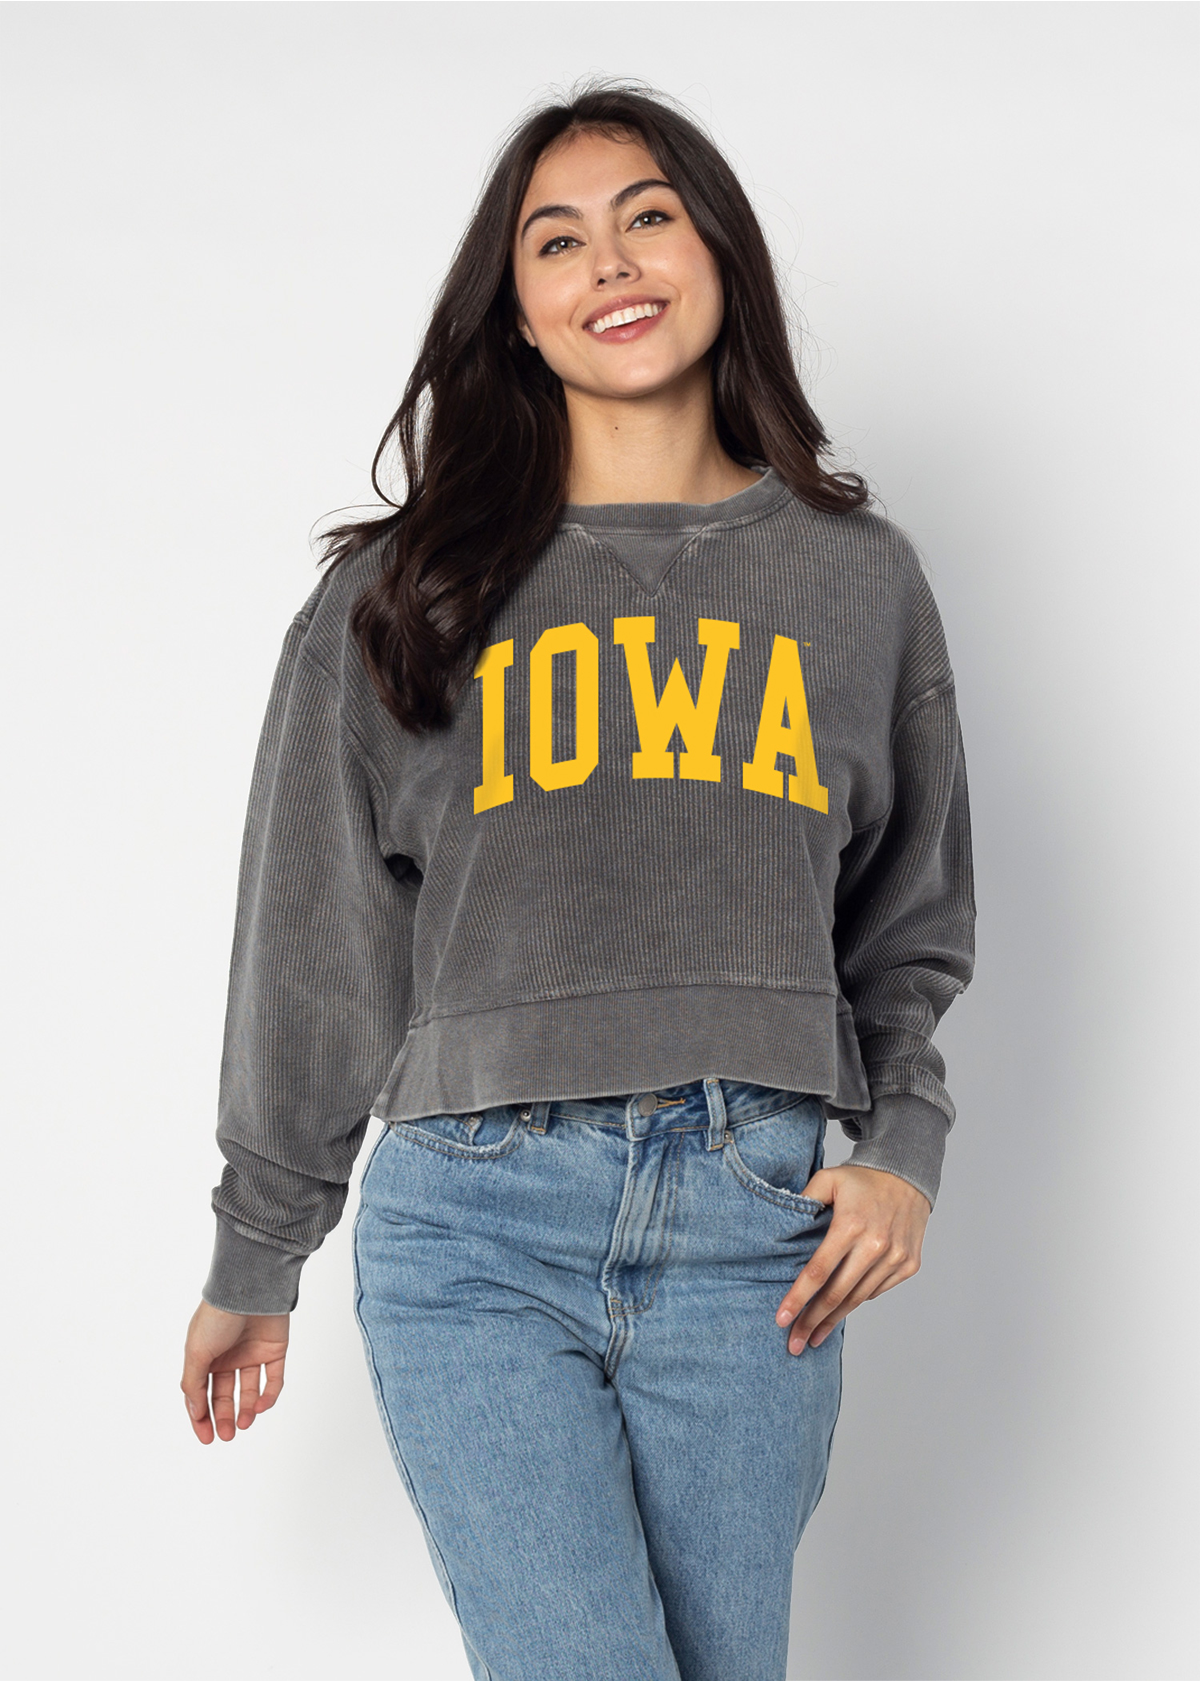 Corded Boxy Pullover Iowa Hawkeyes in Charcoal